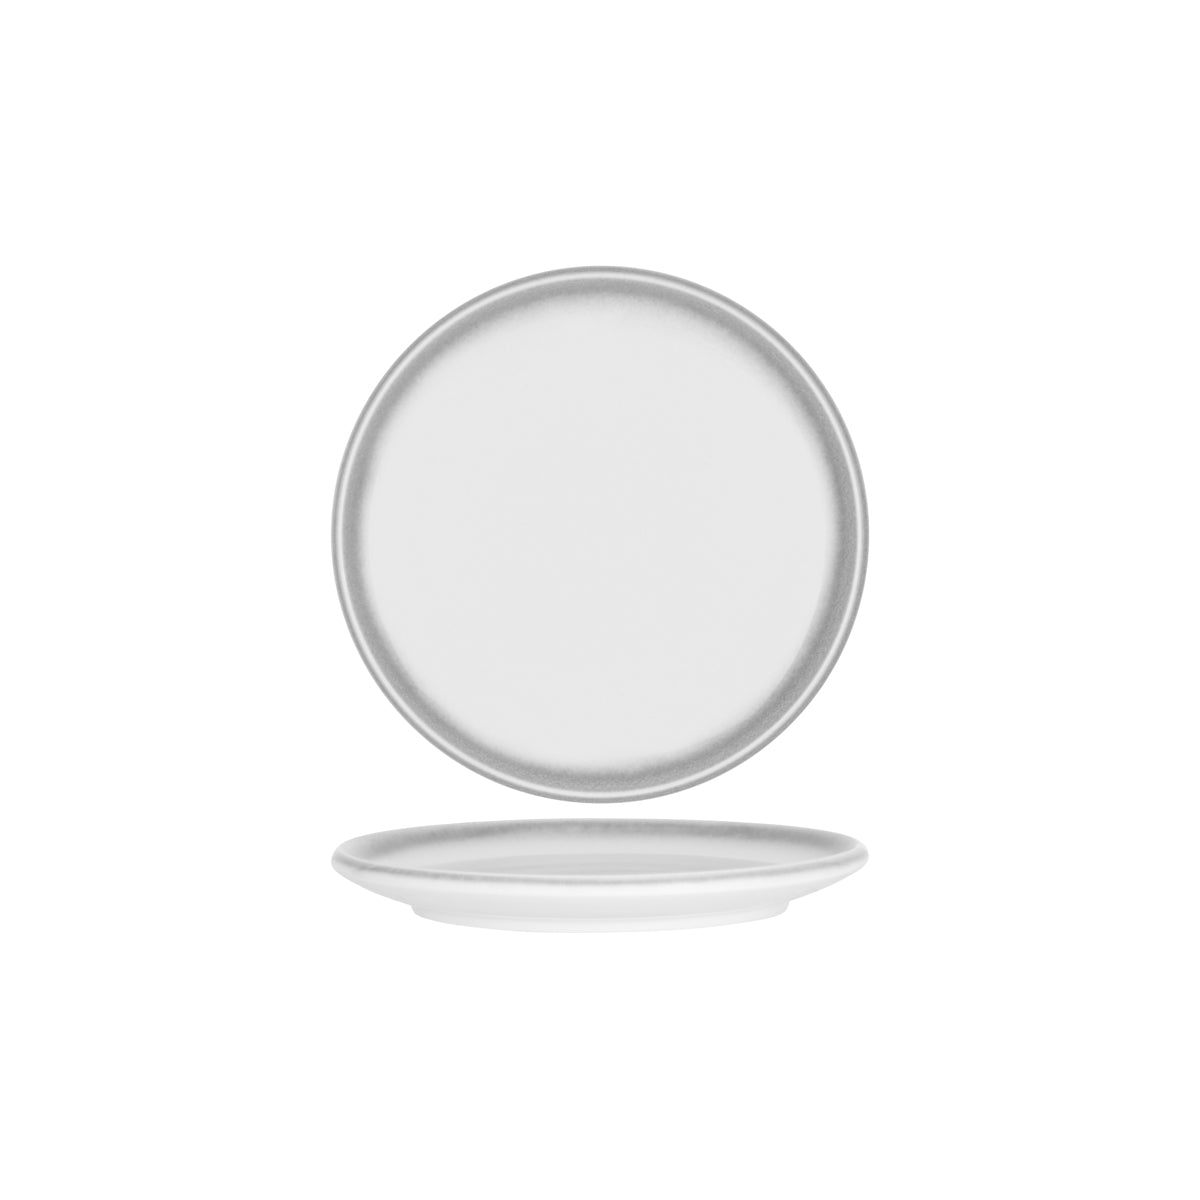 903002 Tablekraft Frosted Steel Round Coupe Plate 245x22mm Tomkin Australia Hospitality Supplies